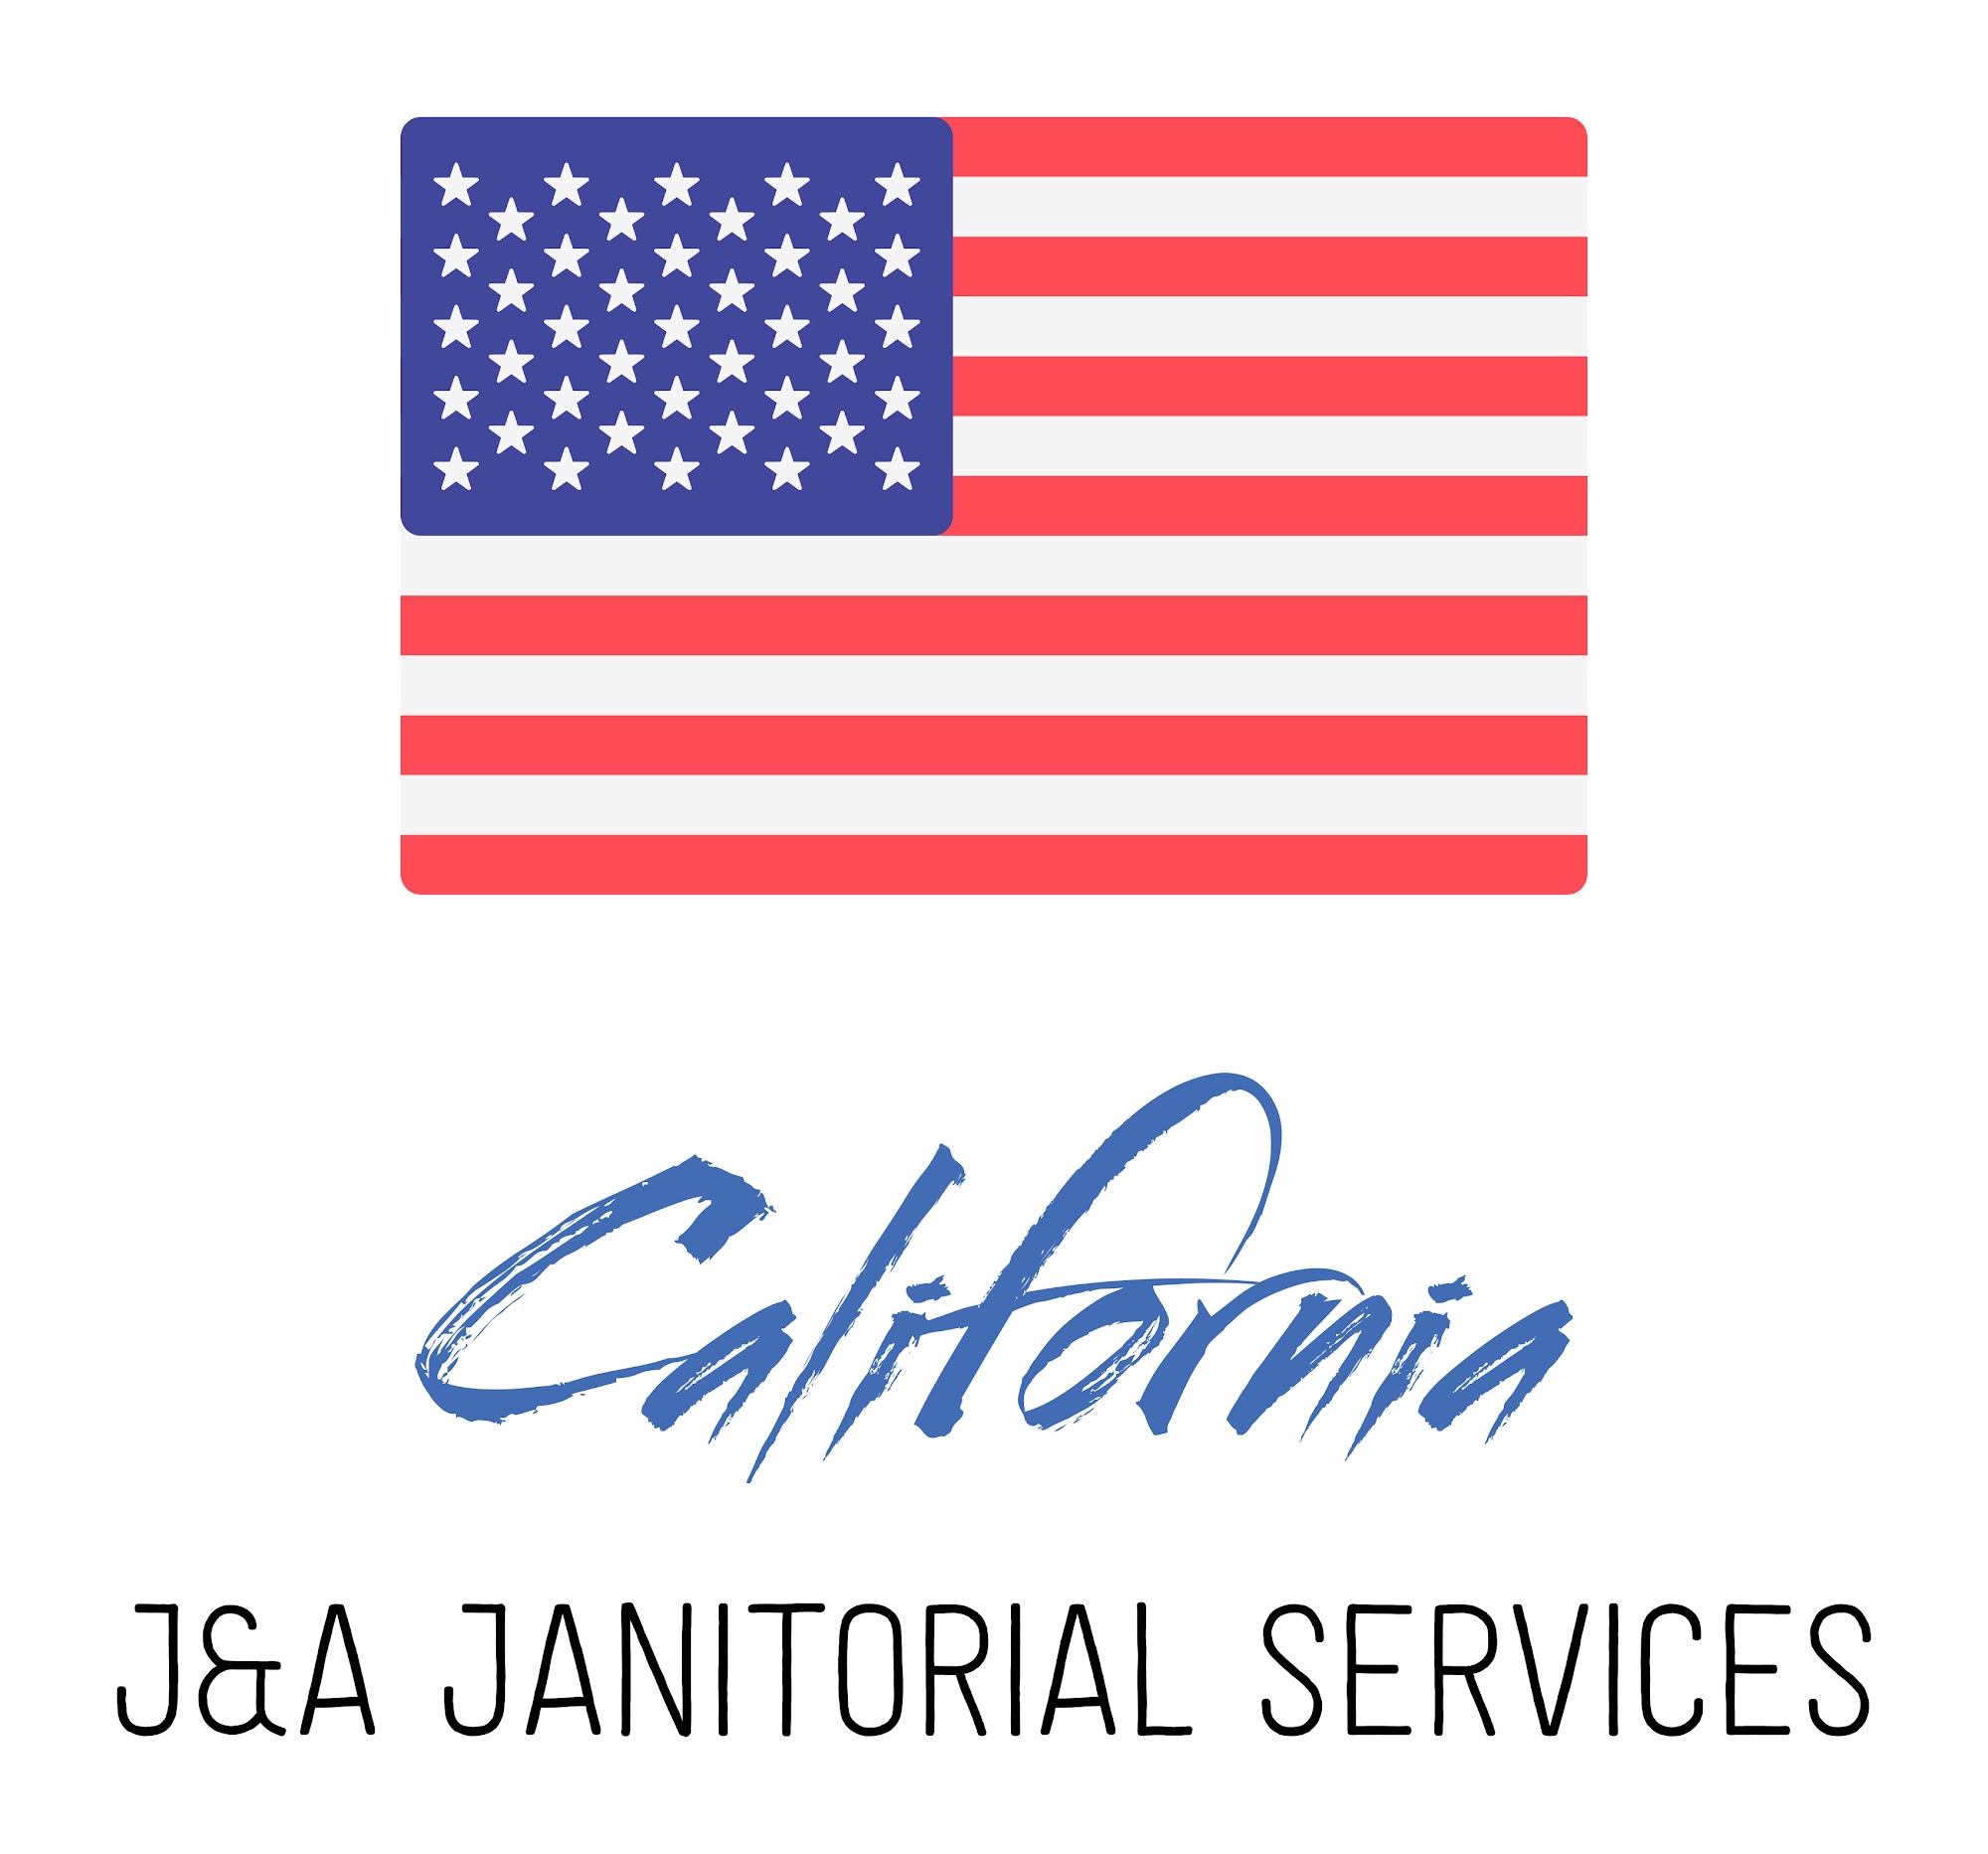 CALIFORNIA J&A JANITORIAL SERVICES 125 N Broadway Ave #36, Bay Point California 94565